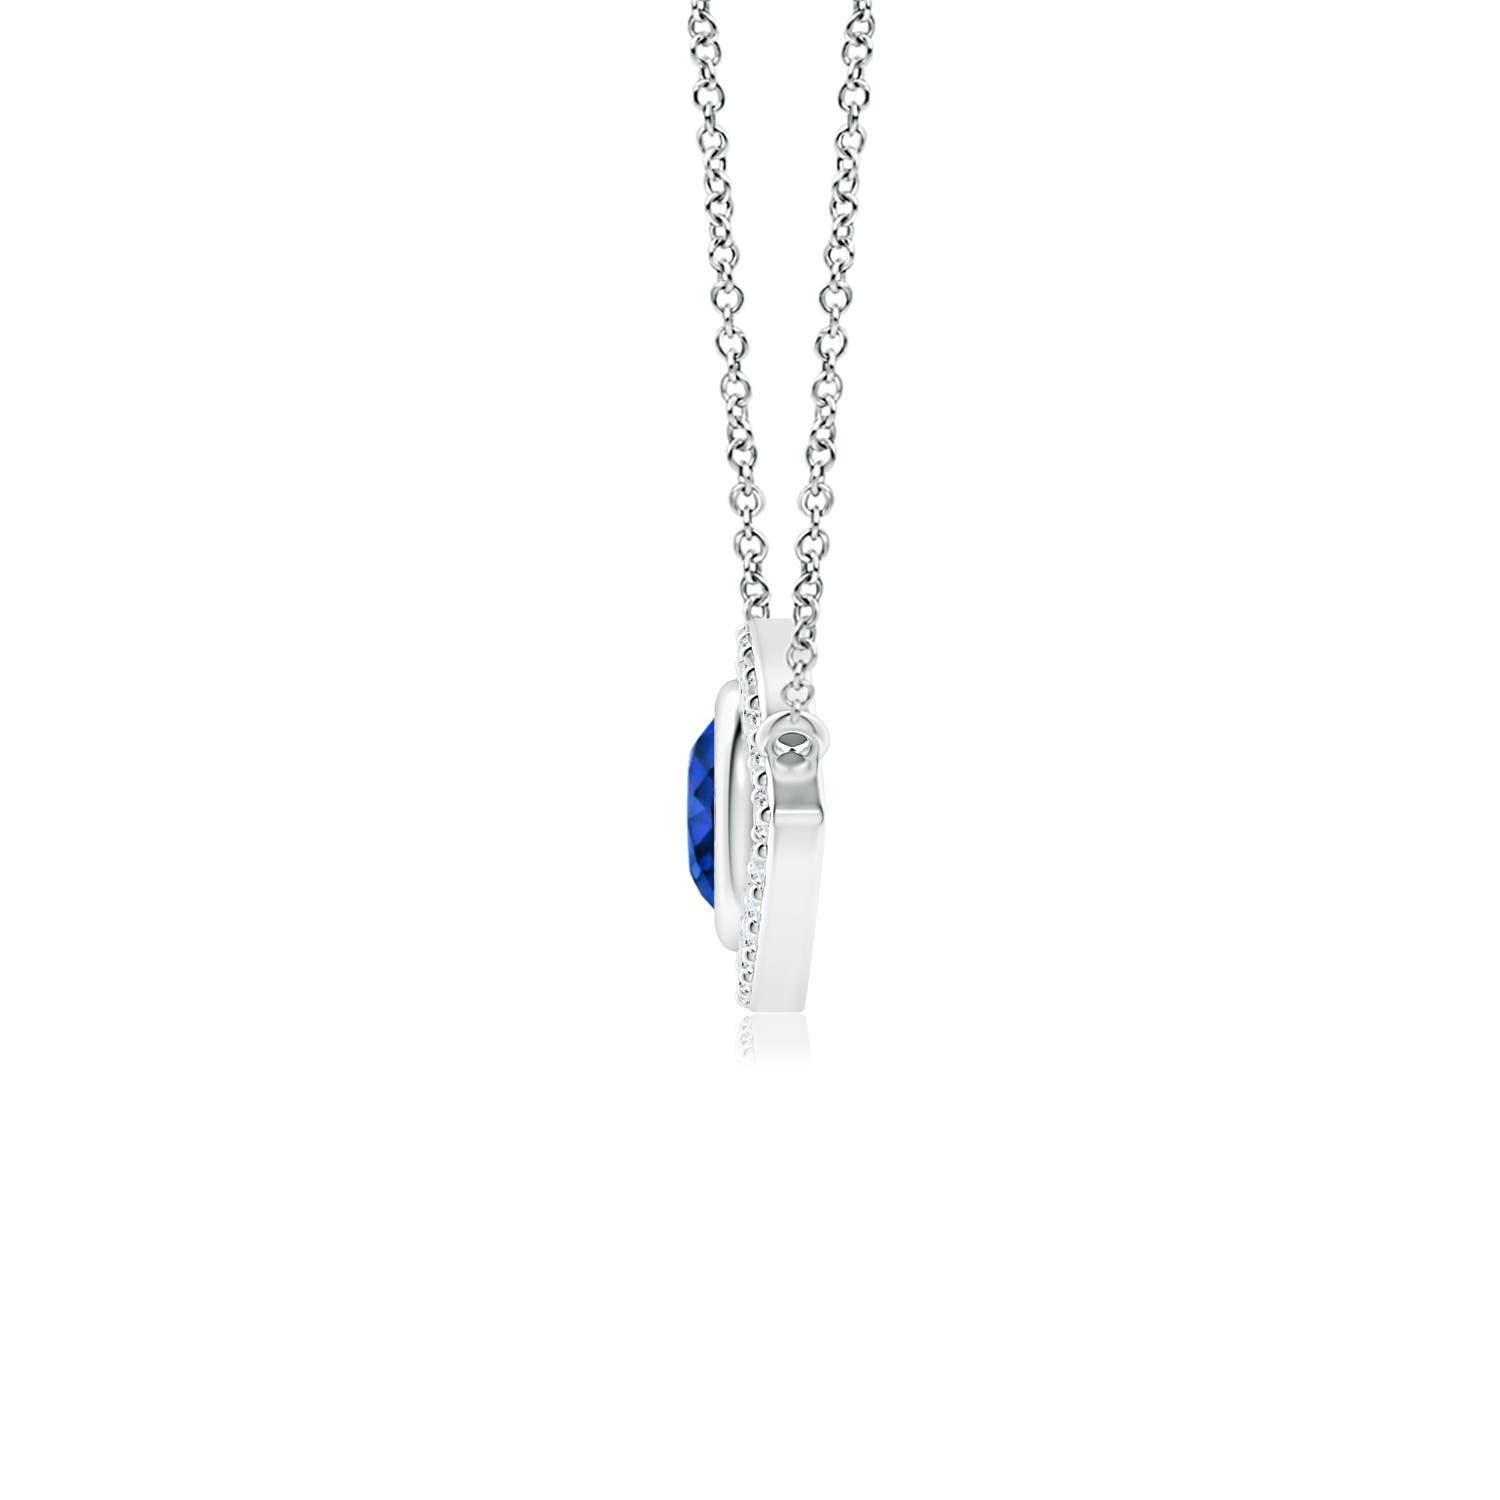 Hanging gracefully from a shiny metal bale is a diamond studded frame with a round sapphire bezel set at the center. The sparkling diamonds create a compelling contrast against the deep blue sapphire. Crafted in 14k white gold, this sapphire evil